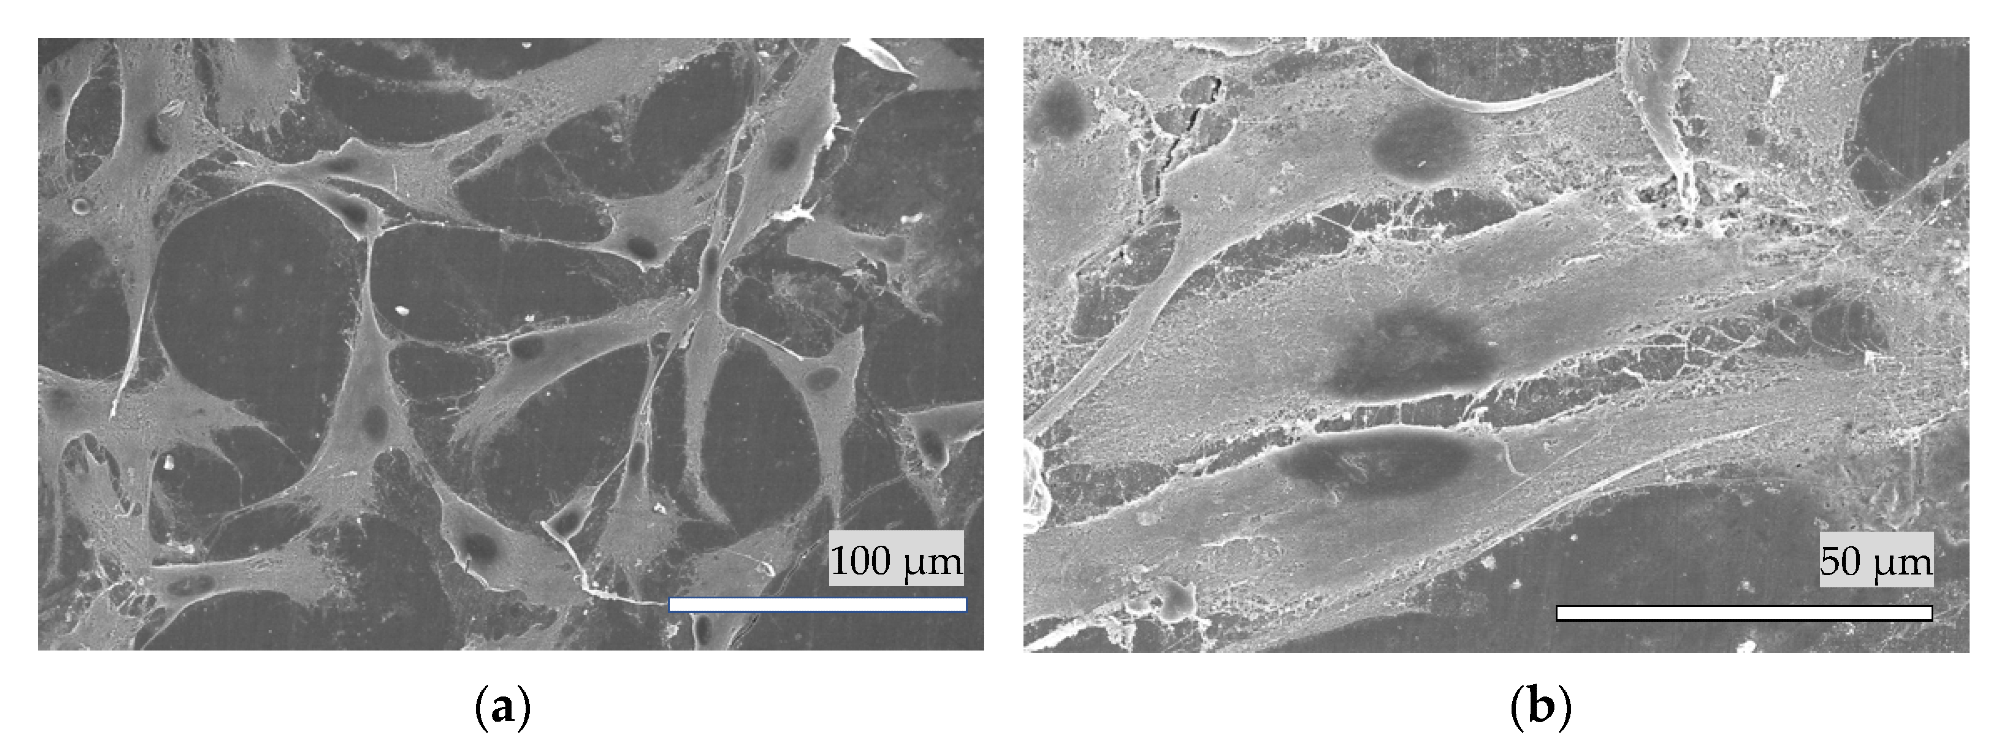 A typical SEM image of HPdLF cells attached to the surface of (a) the hydroxyapatite coating and (b) bovine enamel.